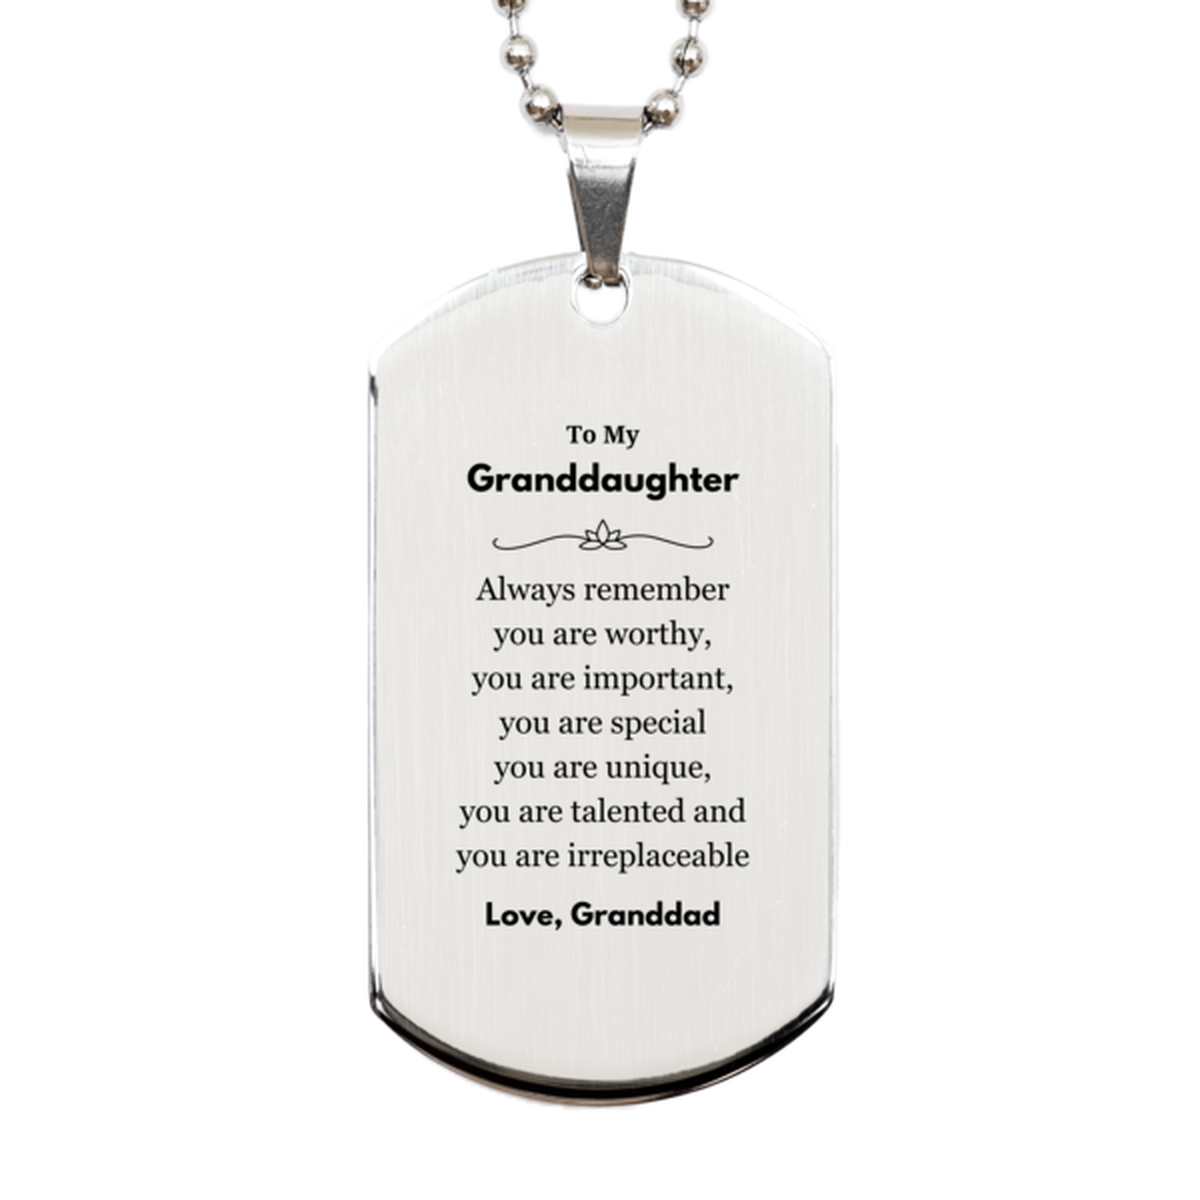 Granddaughter Birthday Gifts from Granddad, Inspirational Silver Dog Tag for Granddaughter Christmas Graduation Gifts for Granddaughter Always remember you are worthy, you are important. Love, Granddad